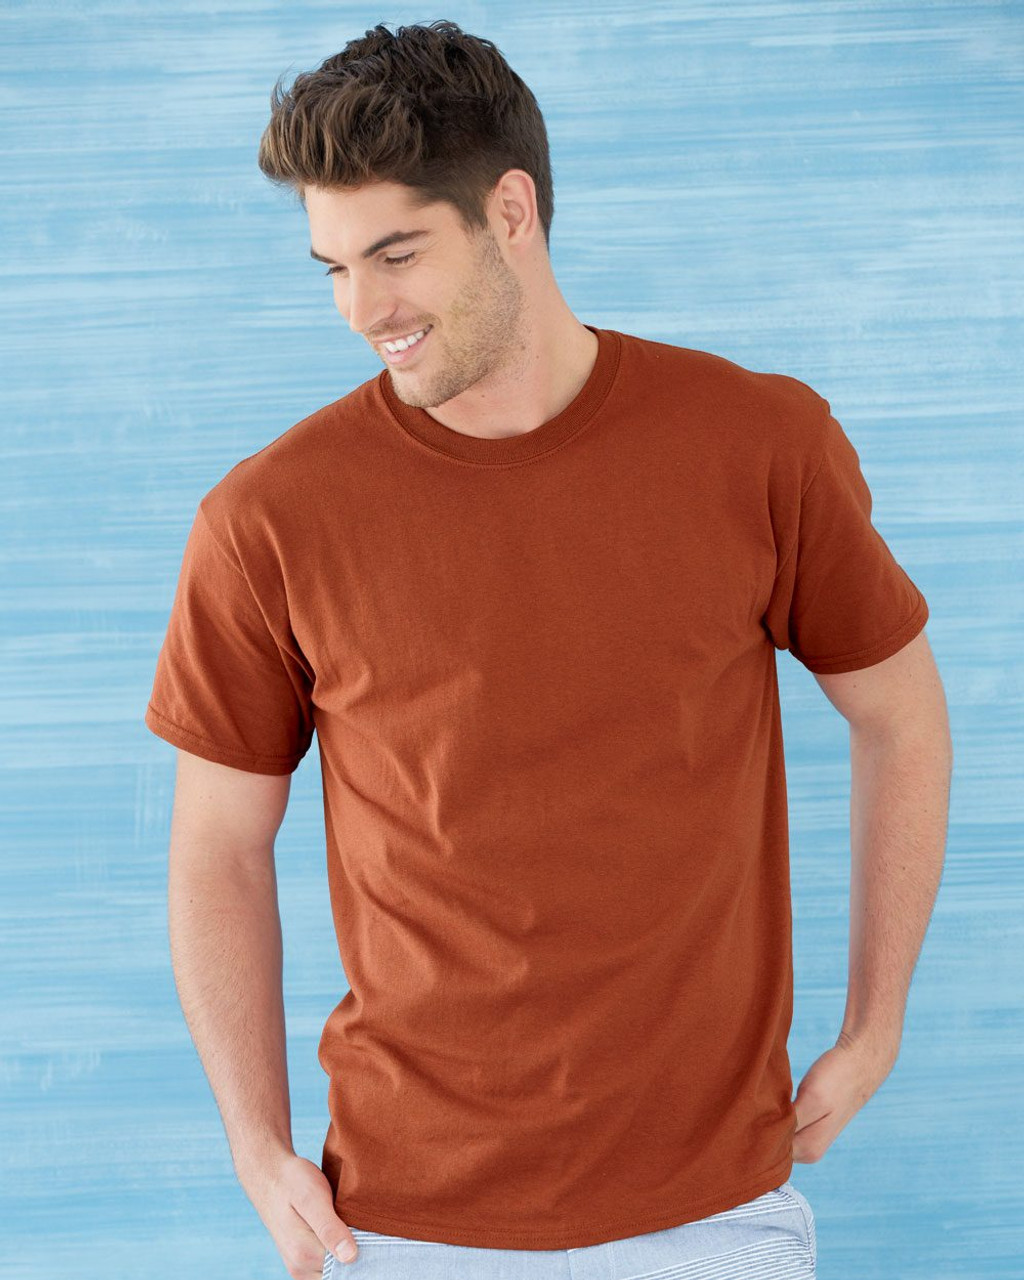 Buy High-Quality Custom T-Shirts in Bulk at Affordable Price